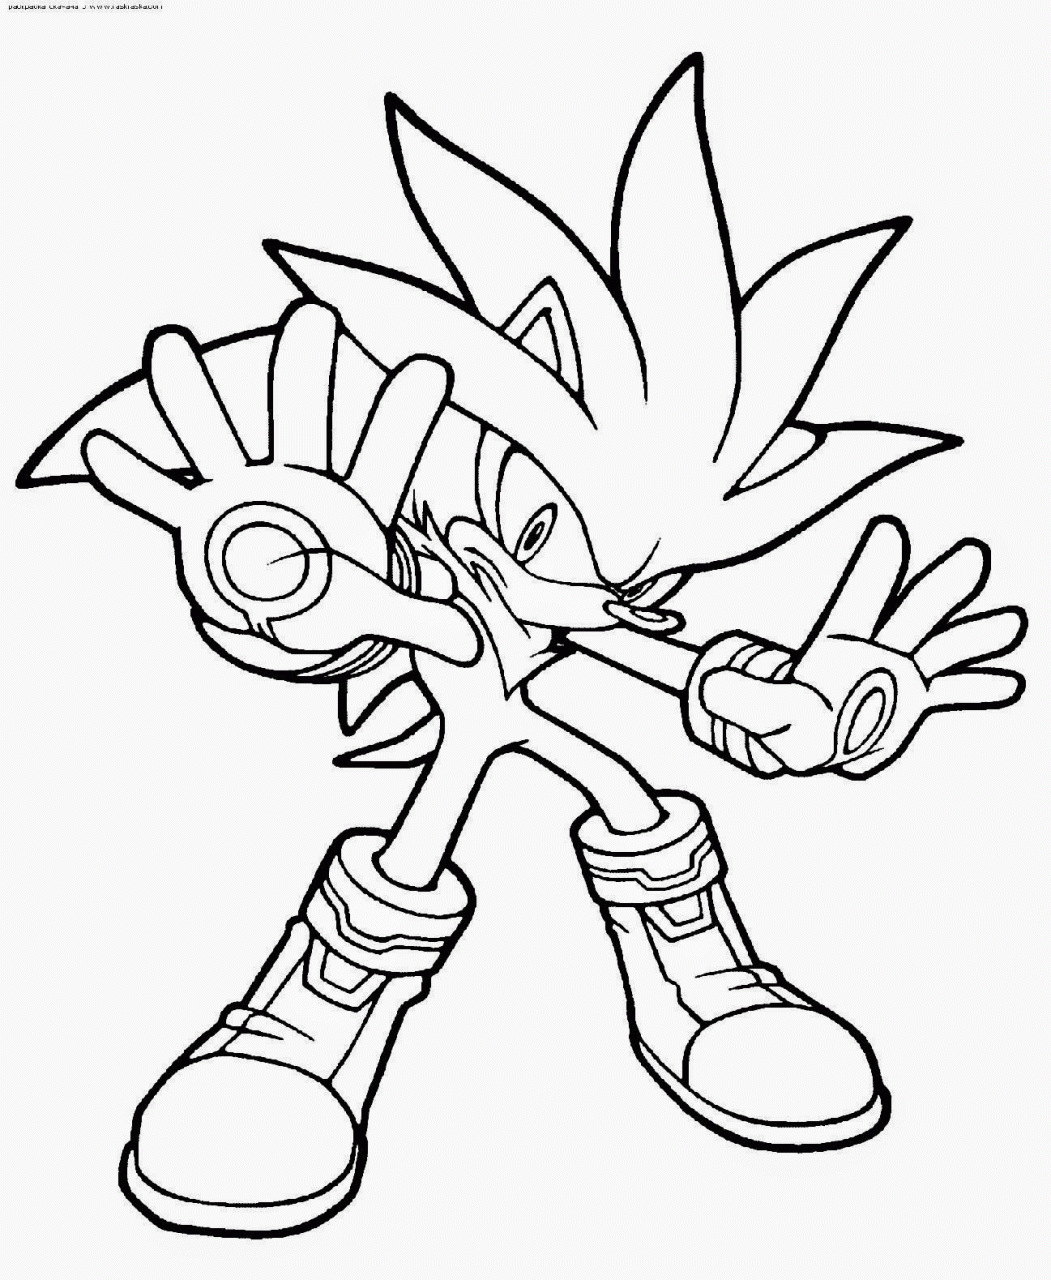 Sonic Coloring Pages Printable